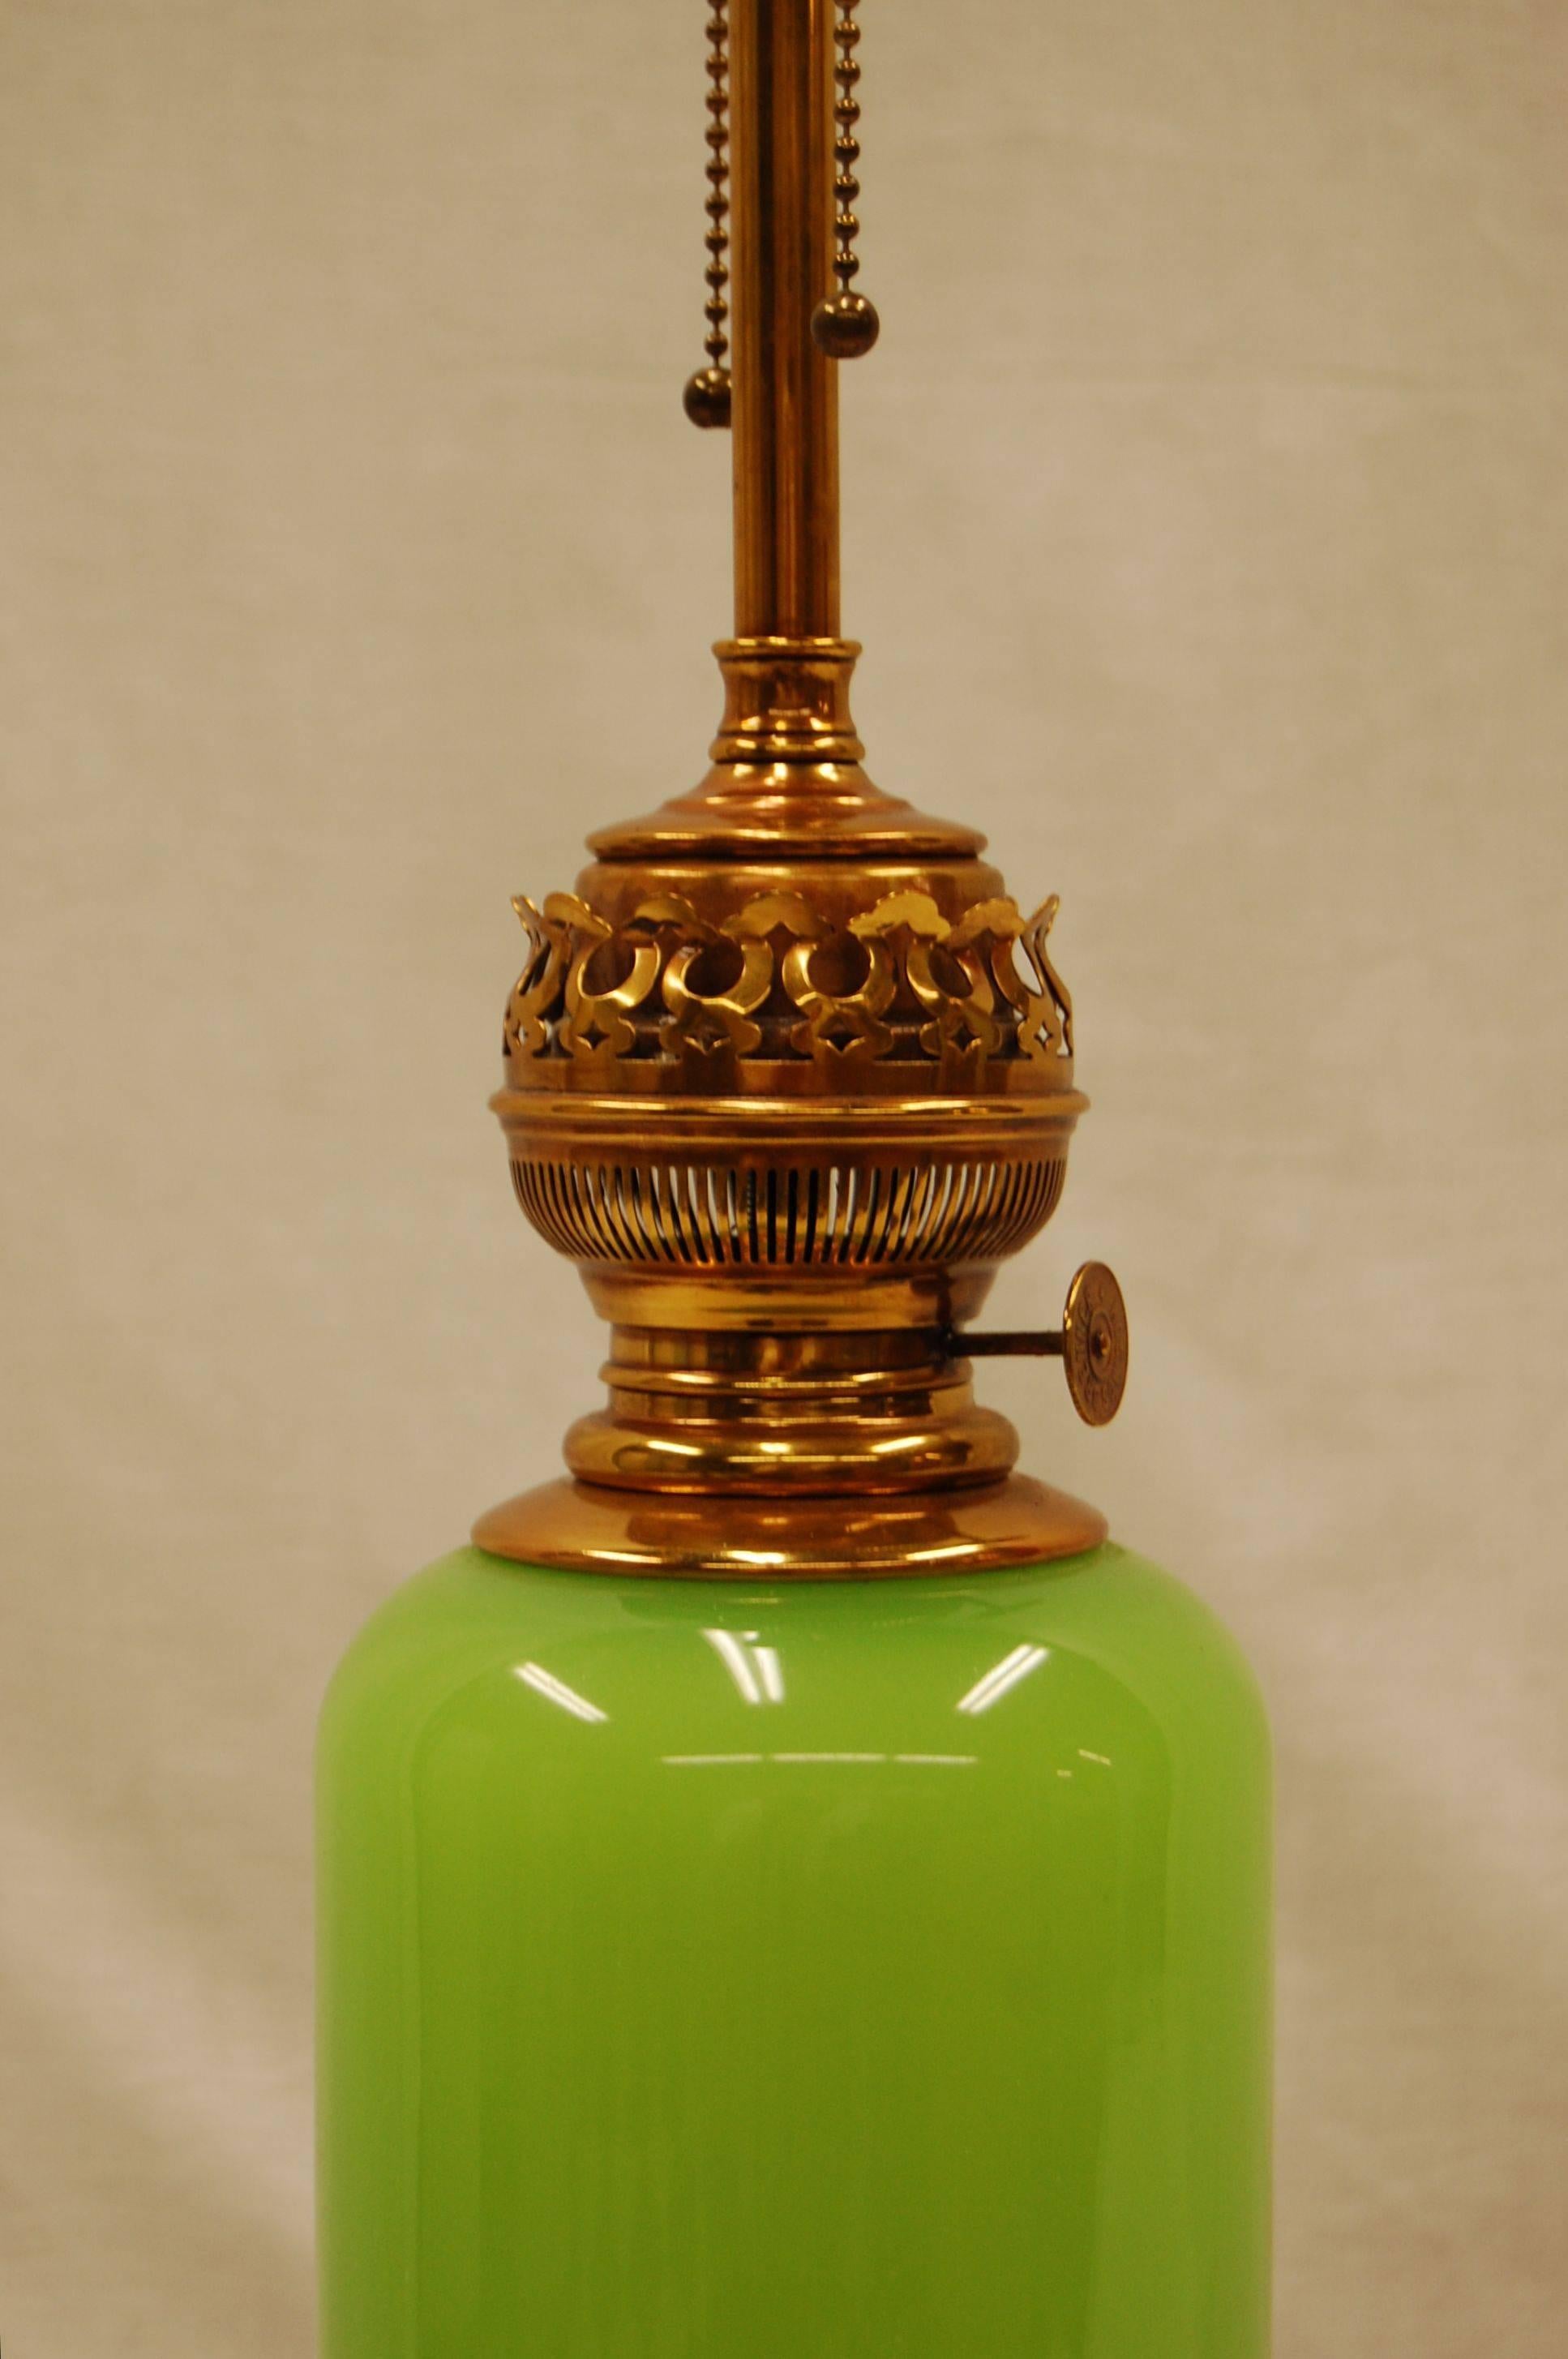 This bright green glass lamp with brass fittings is of a very fine quality. The height to the top of the brass burner is 18 1/2 inches.